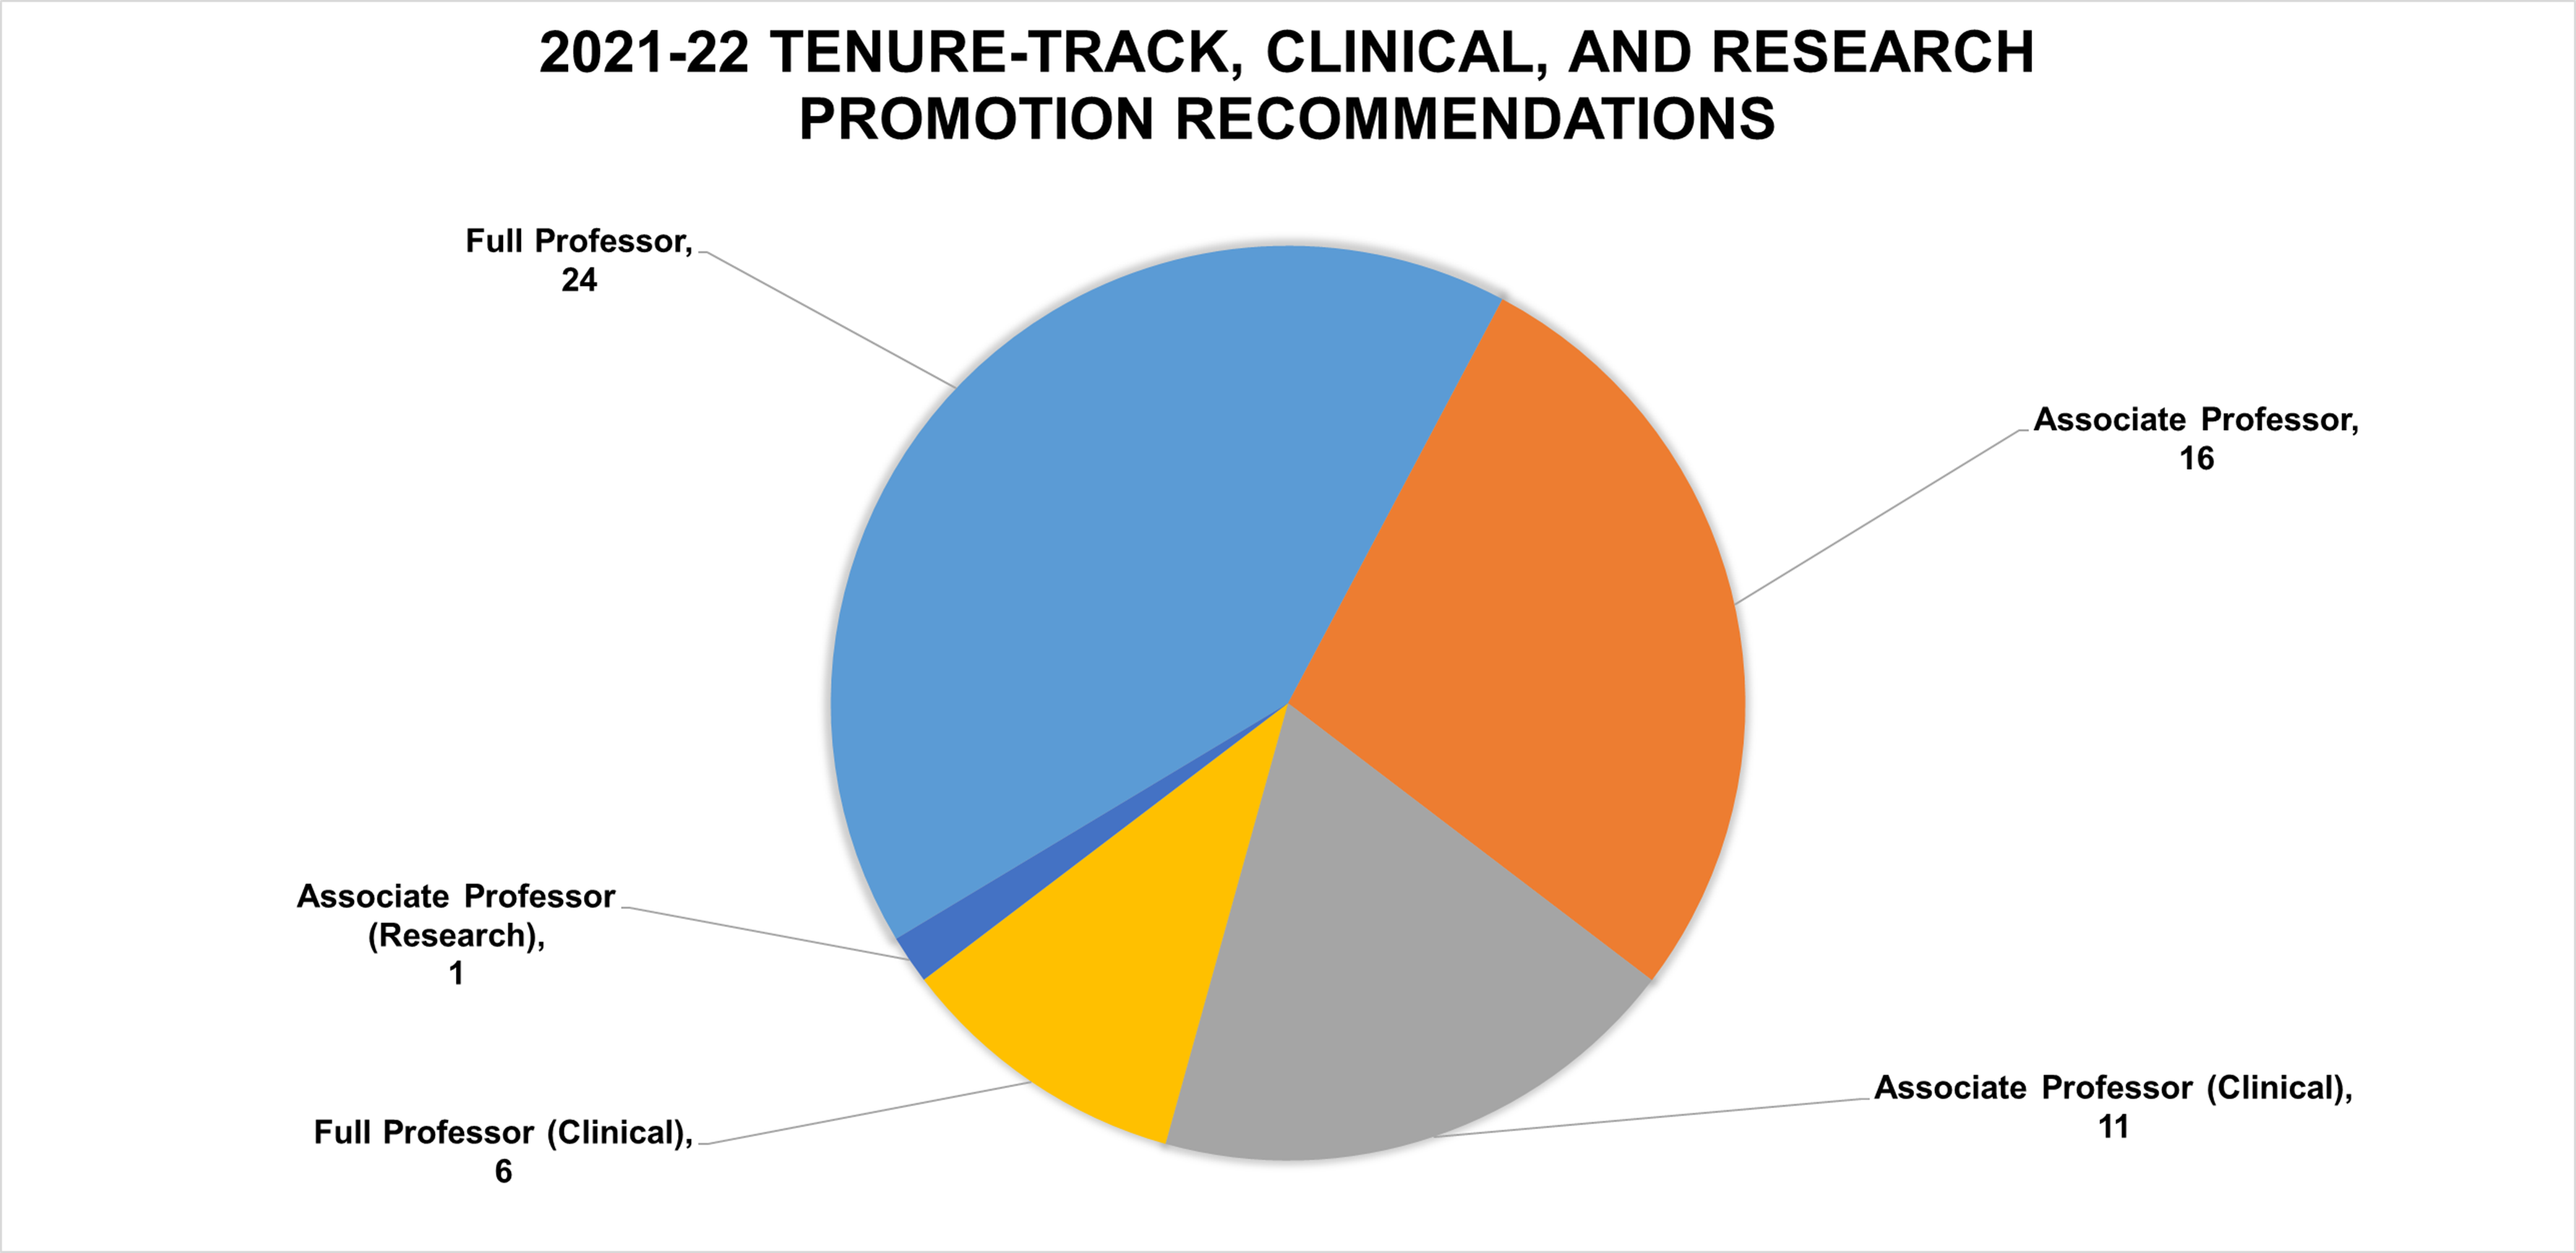 2021-22 Tenure-Track, Clinical, and Research Promotion Recommendations